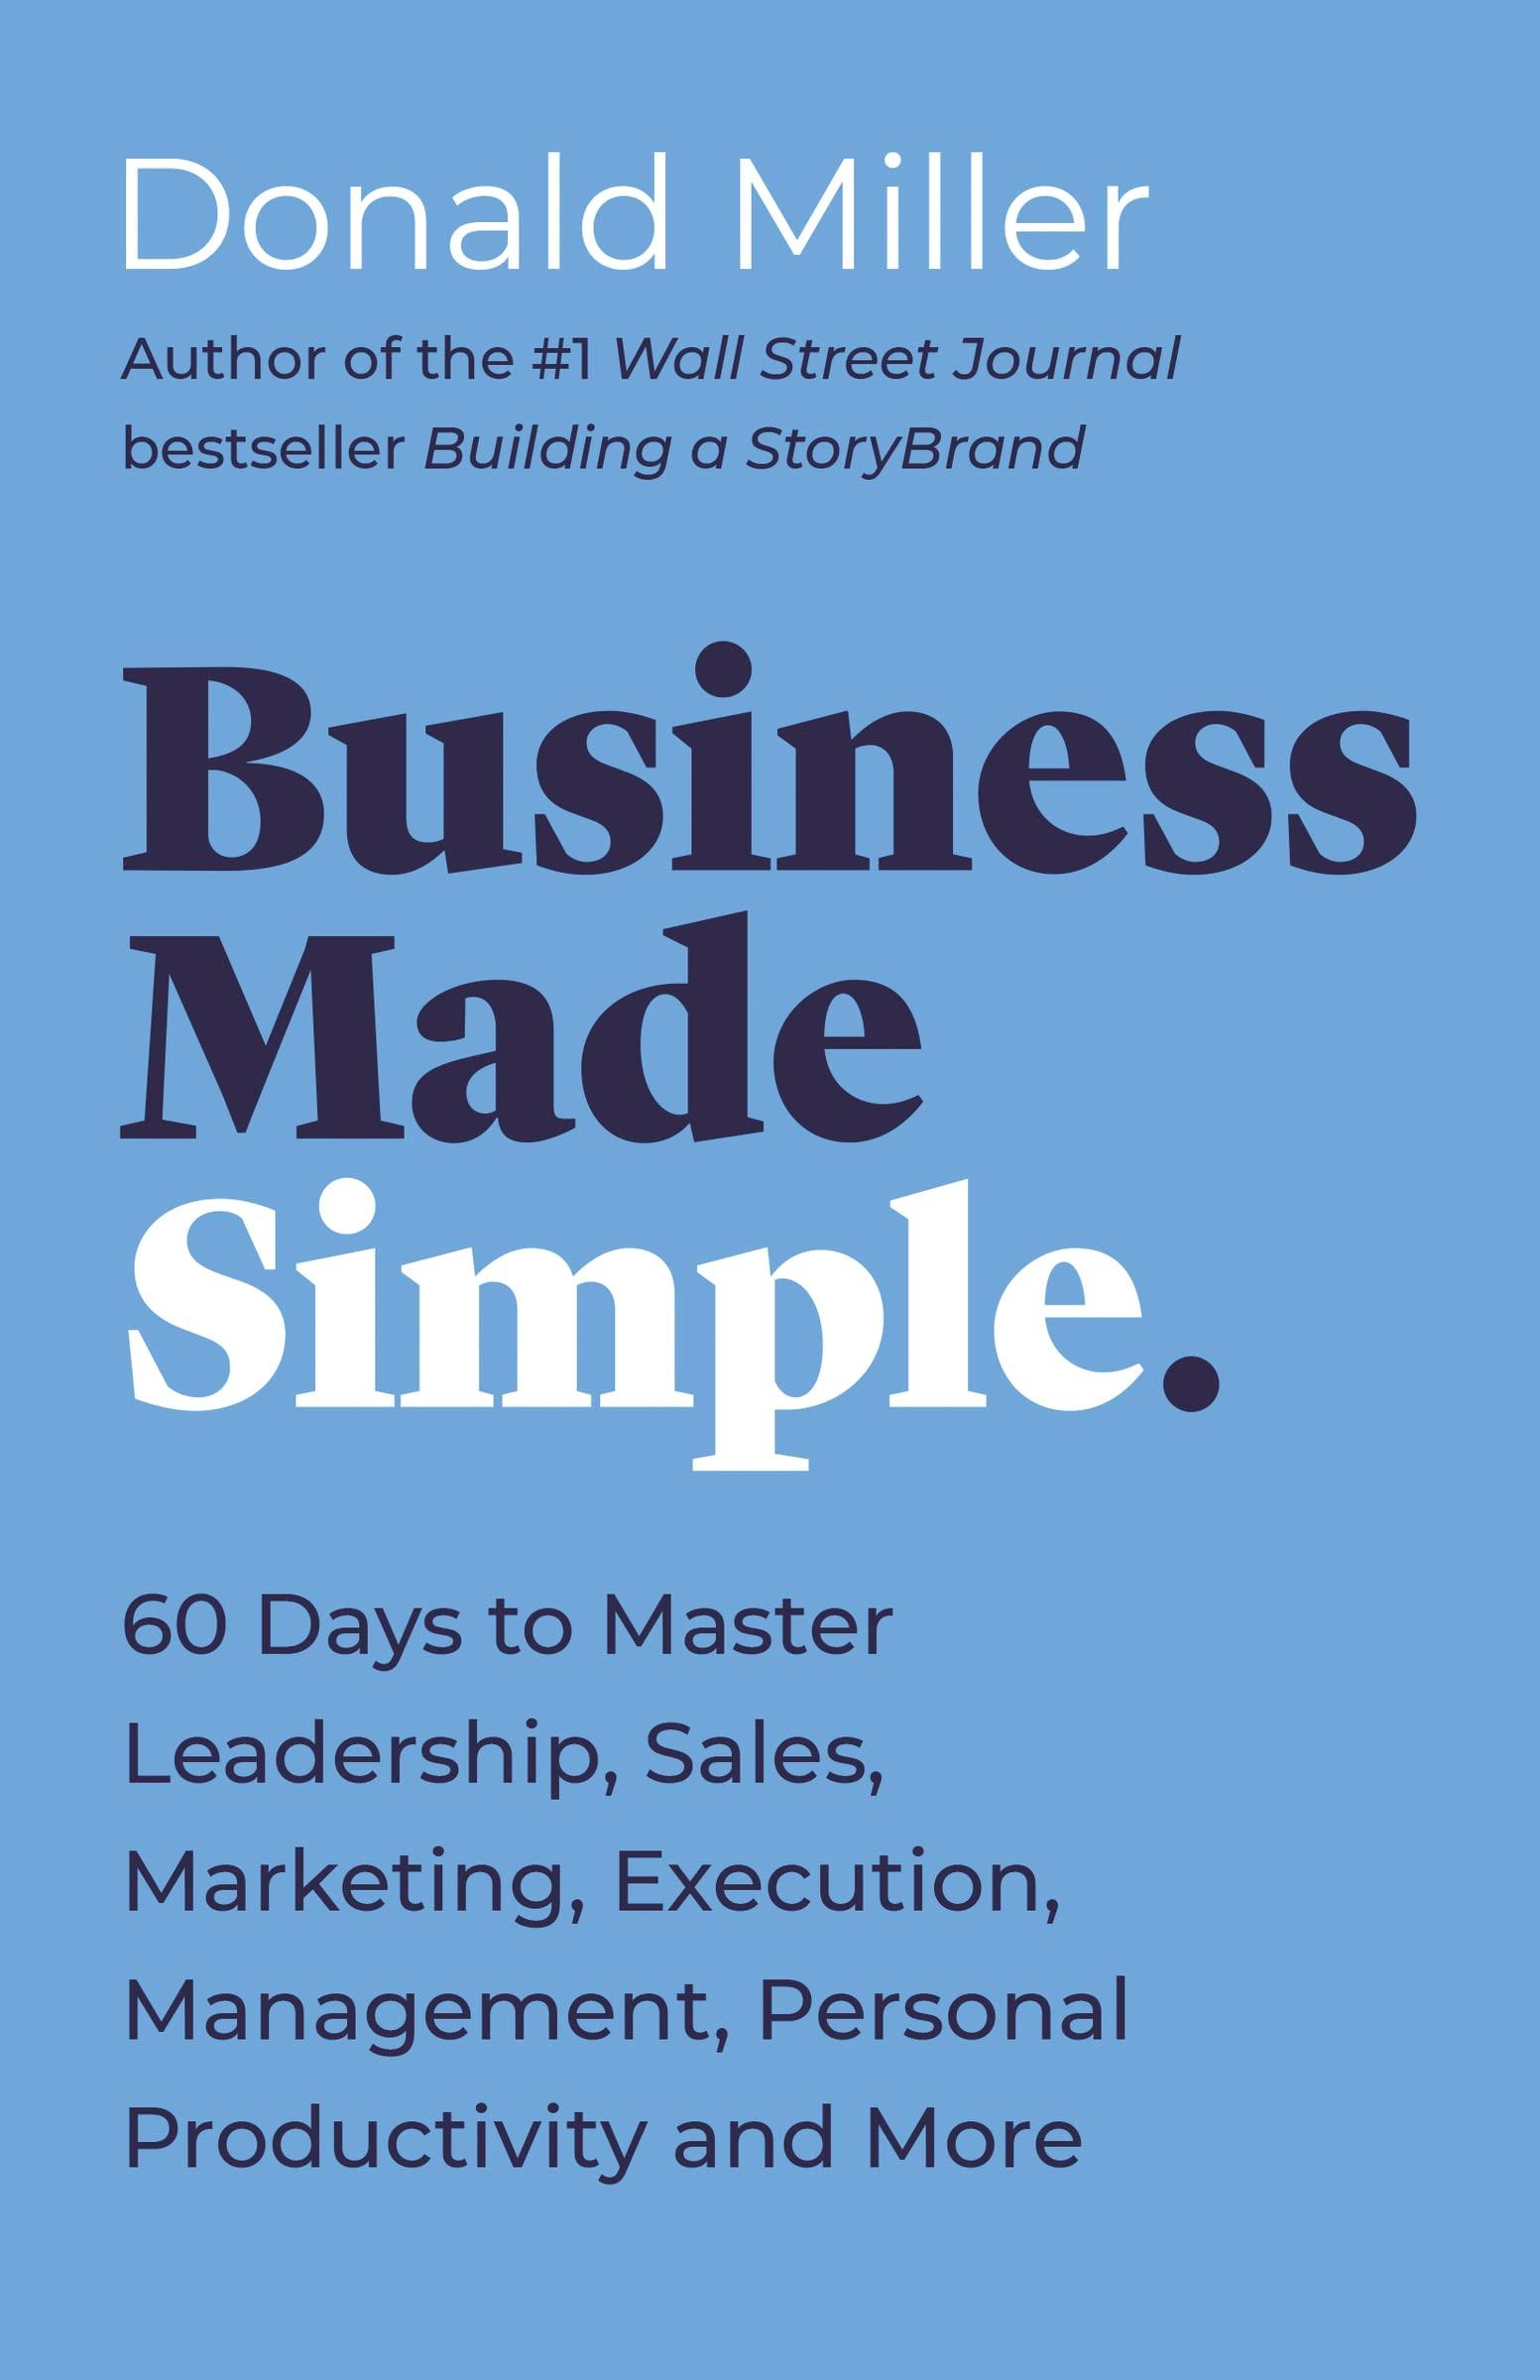 business made simple 60 days to master leadership sales marketing execution management personal productivity